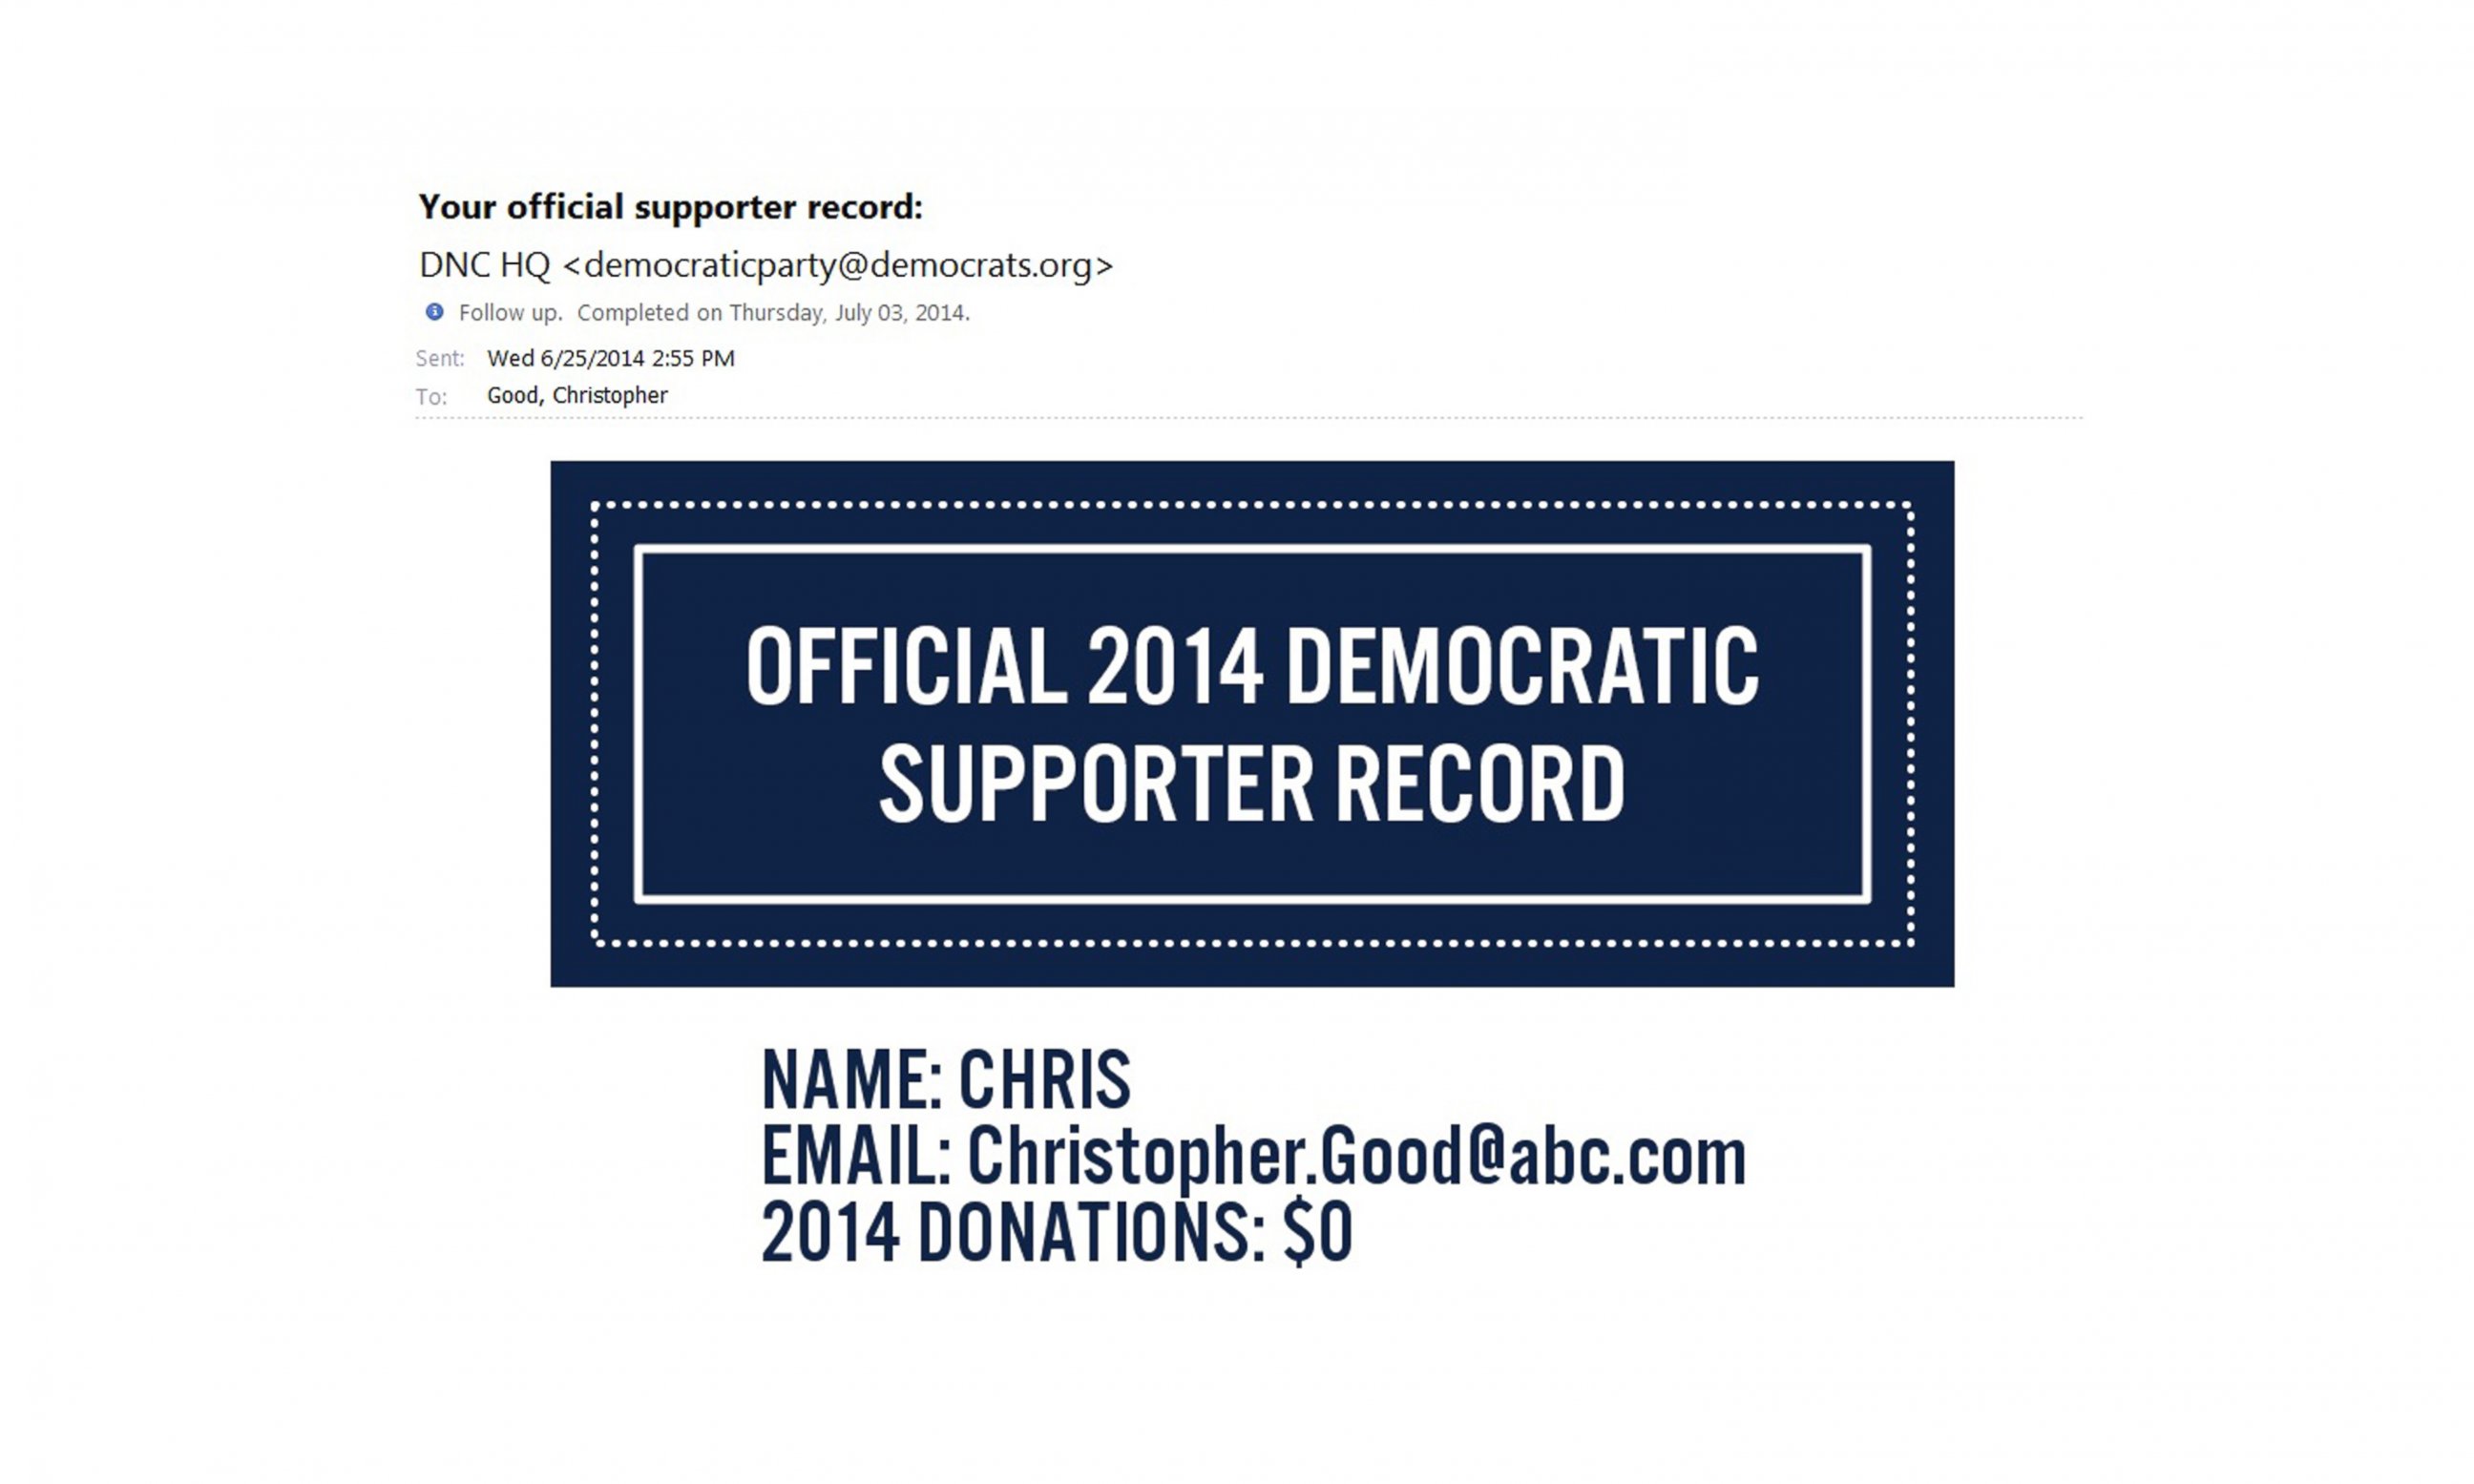 PHOTO: The Democratic Party prods donation-derelict supporters (and reporters who subscribe) with emails that look like invoices